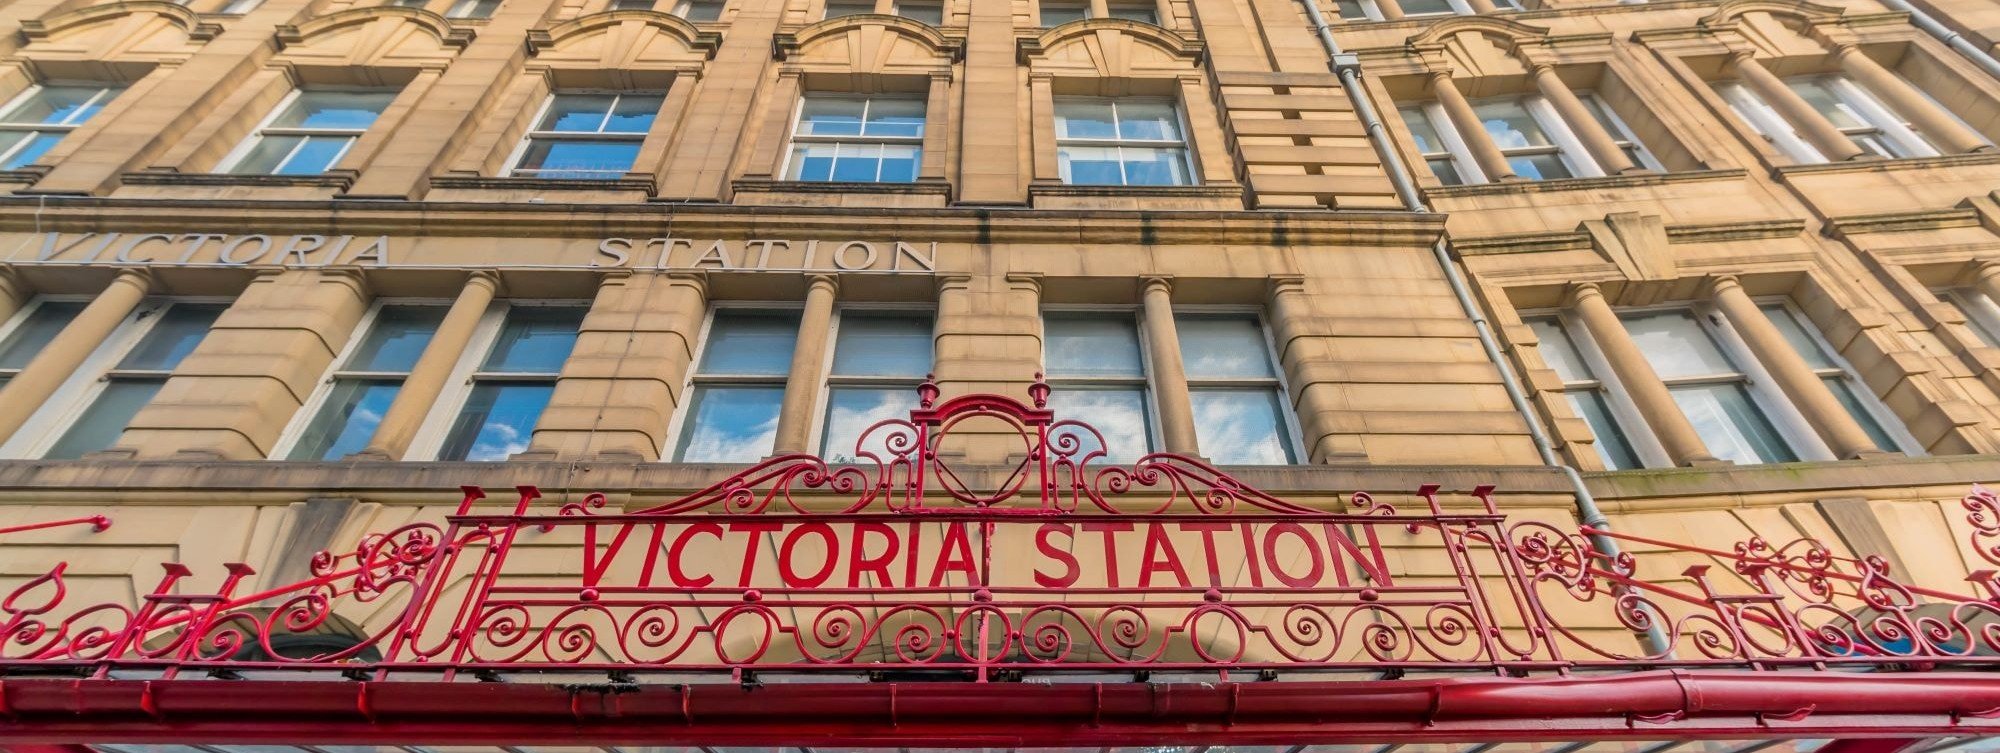 image-shows-manchester-victoria-station-exterior